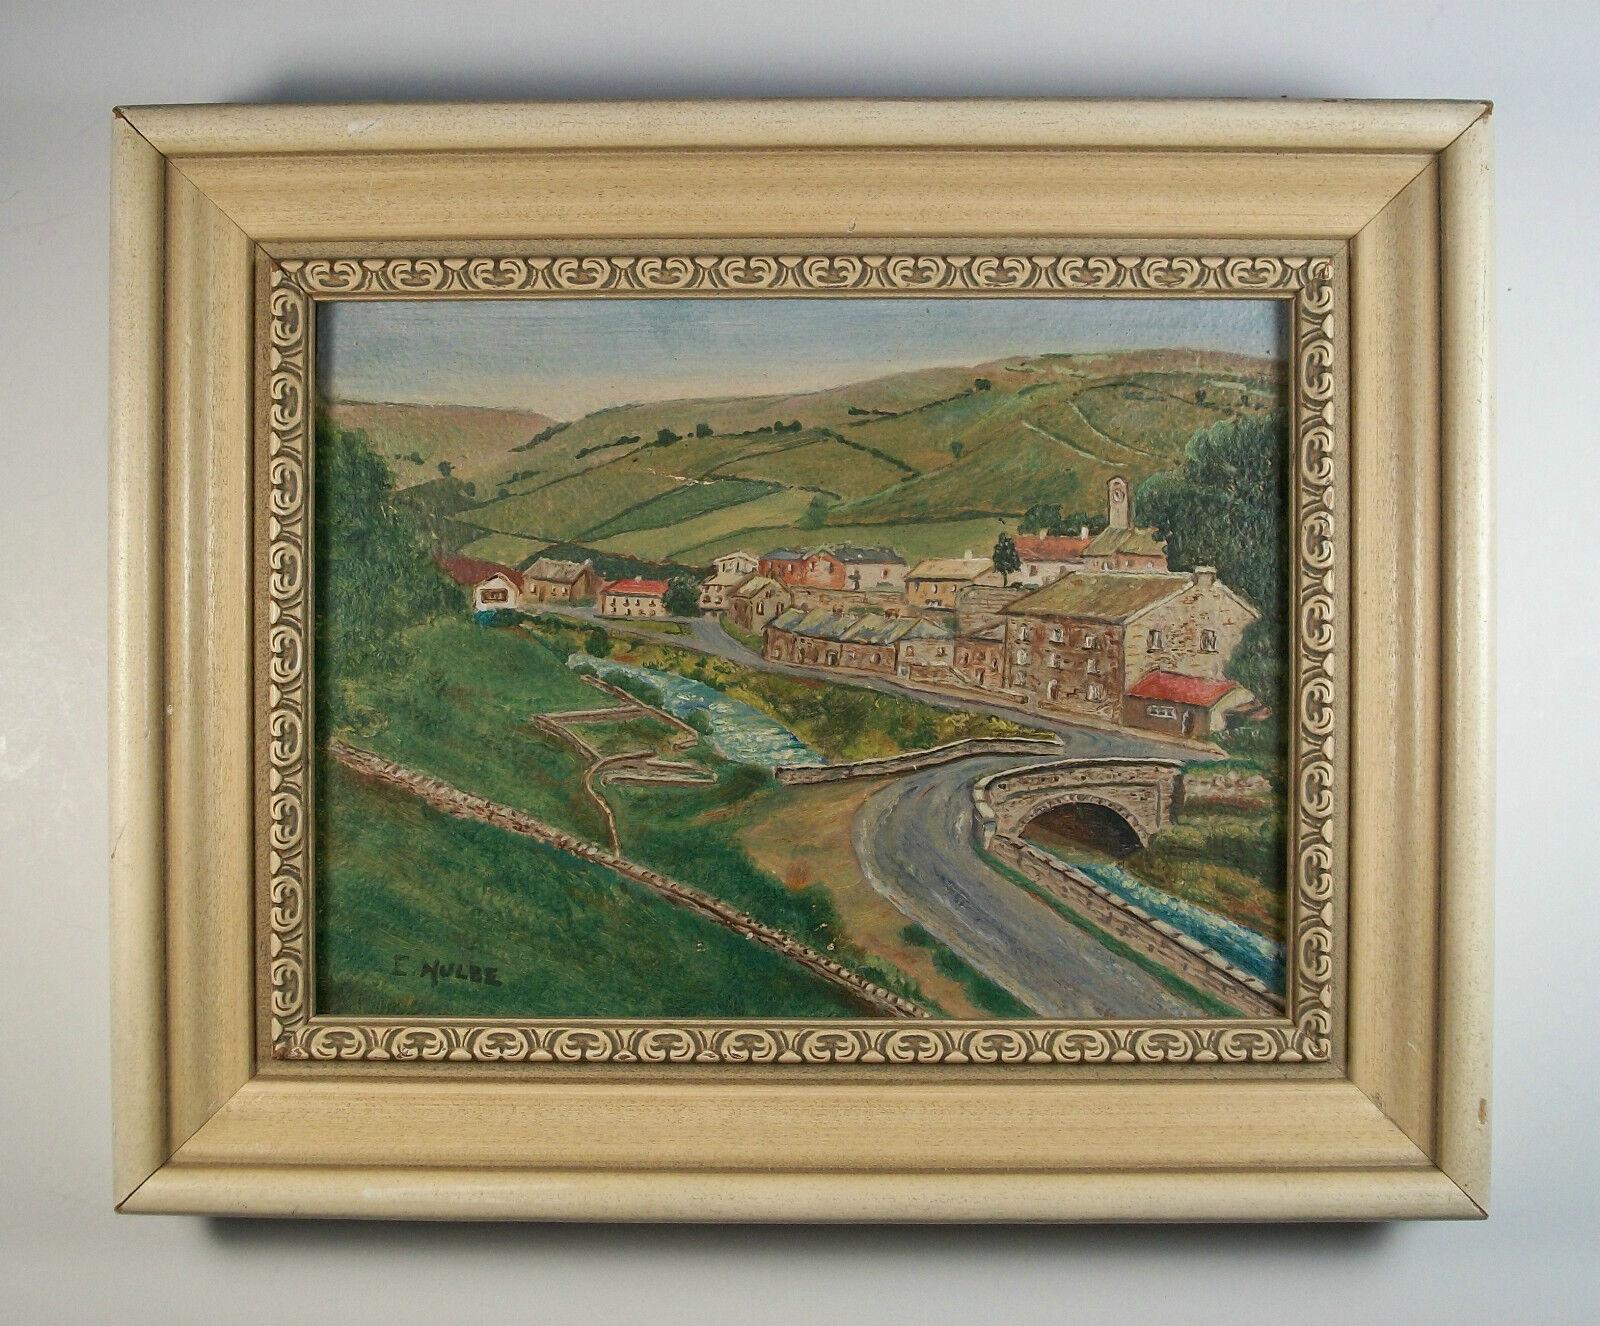 Hand-Painted E. MULBE - Vintage Gouache Painting on Panel - Signed - Framed - 20th Century For Sale